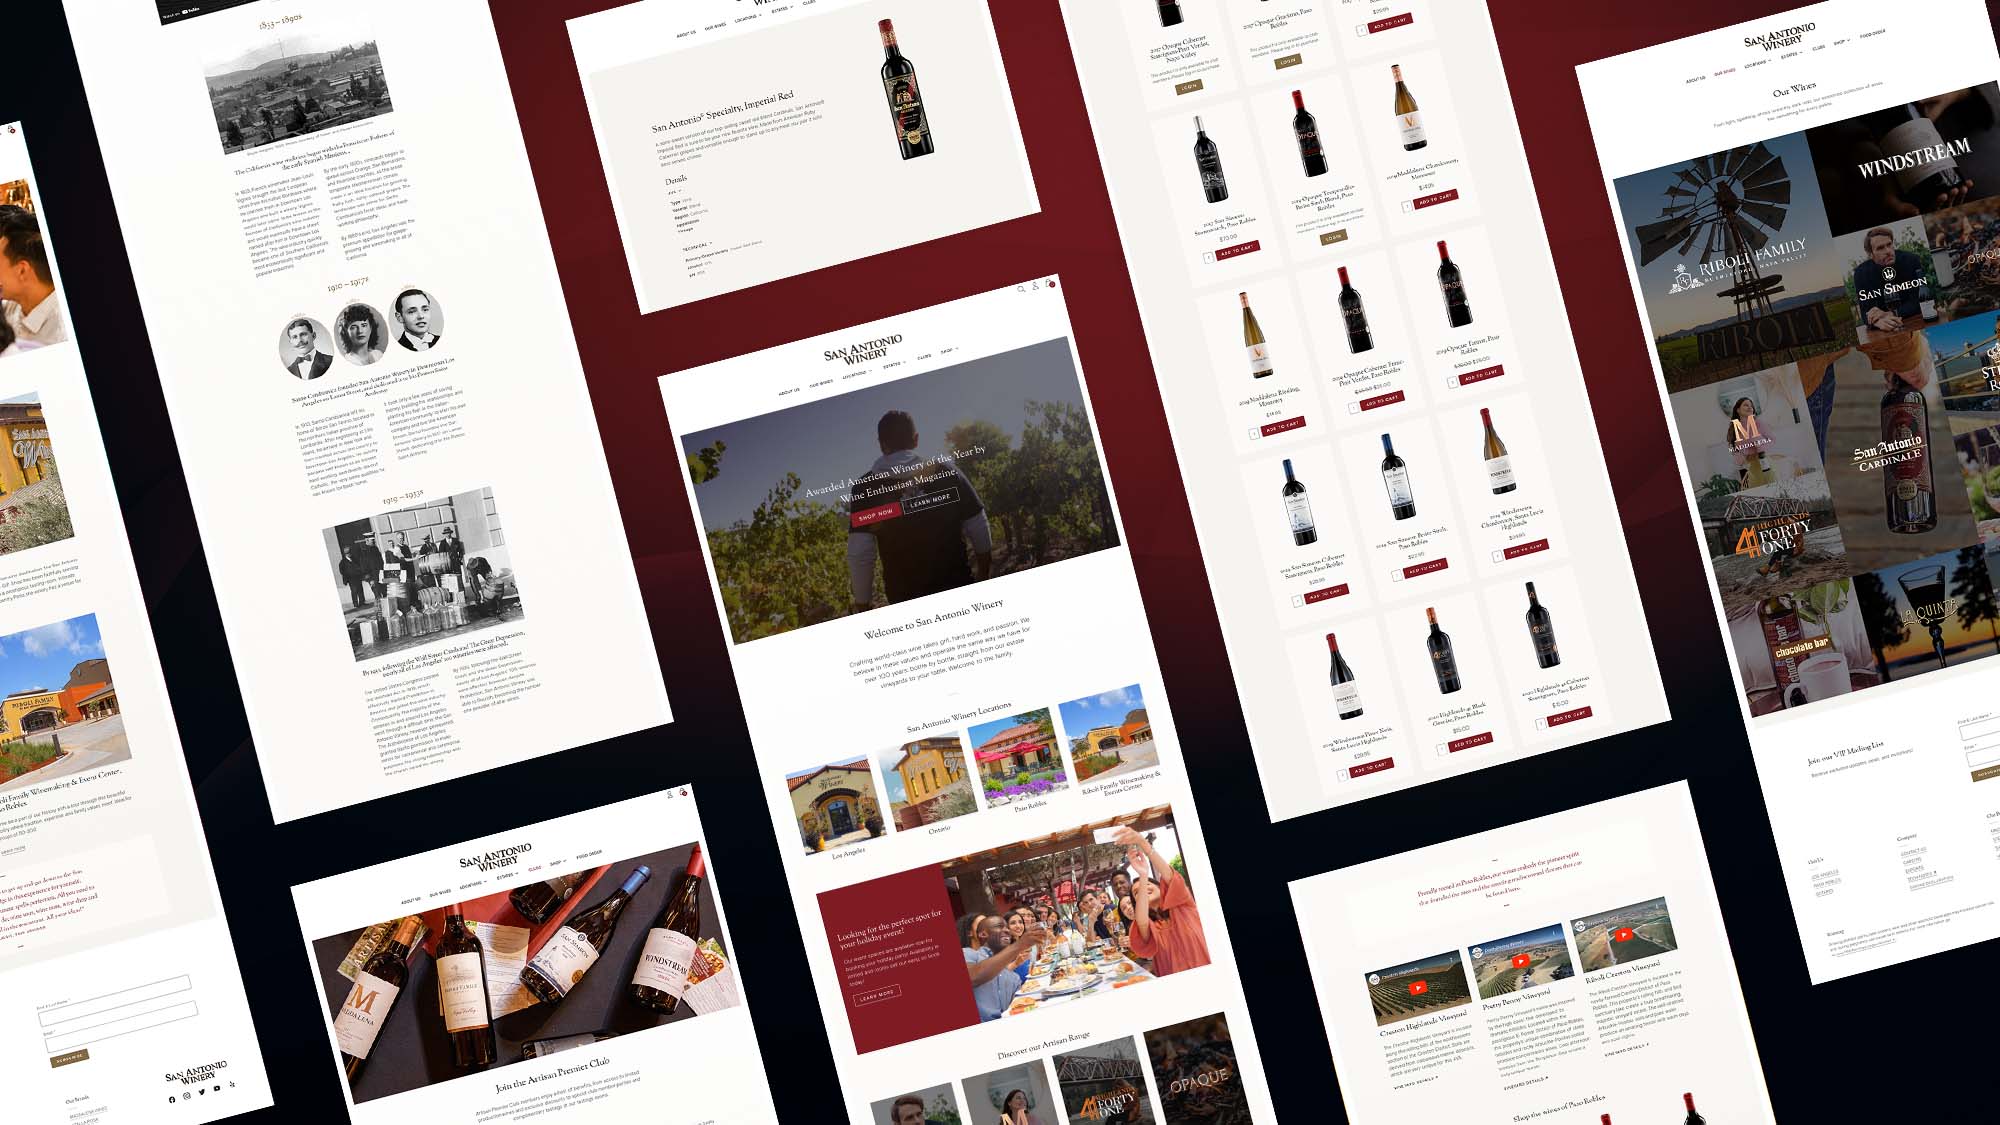 website pages from San Antonio Winery showing examples of 5forests work